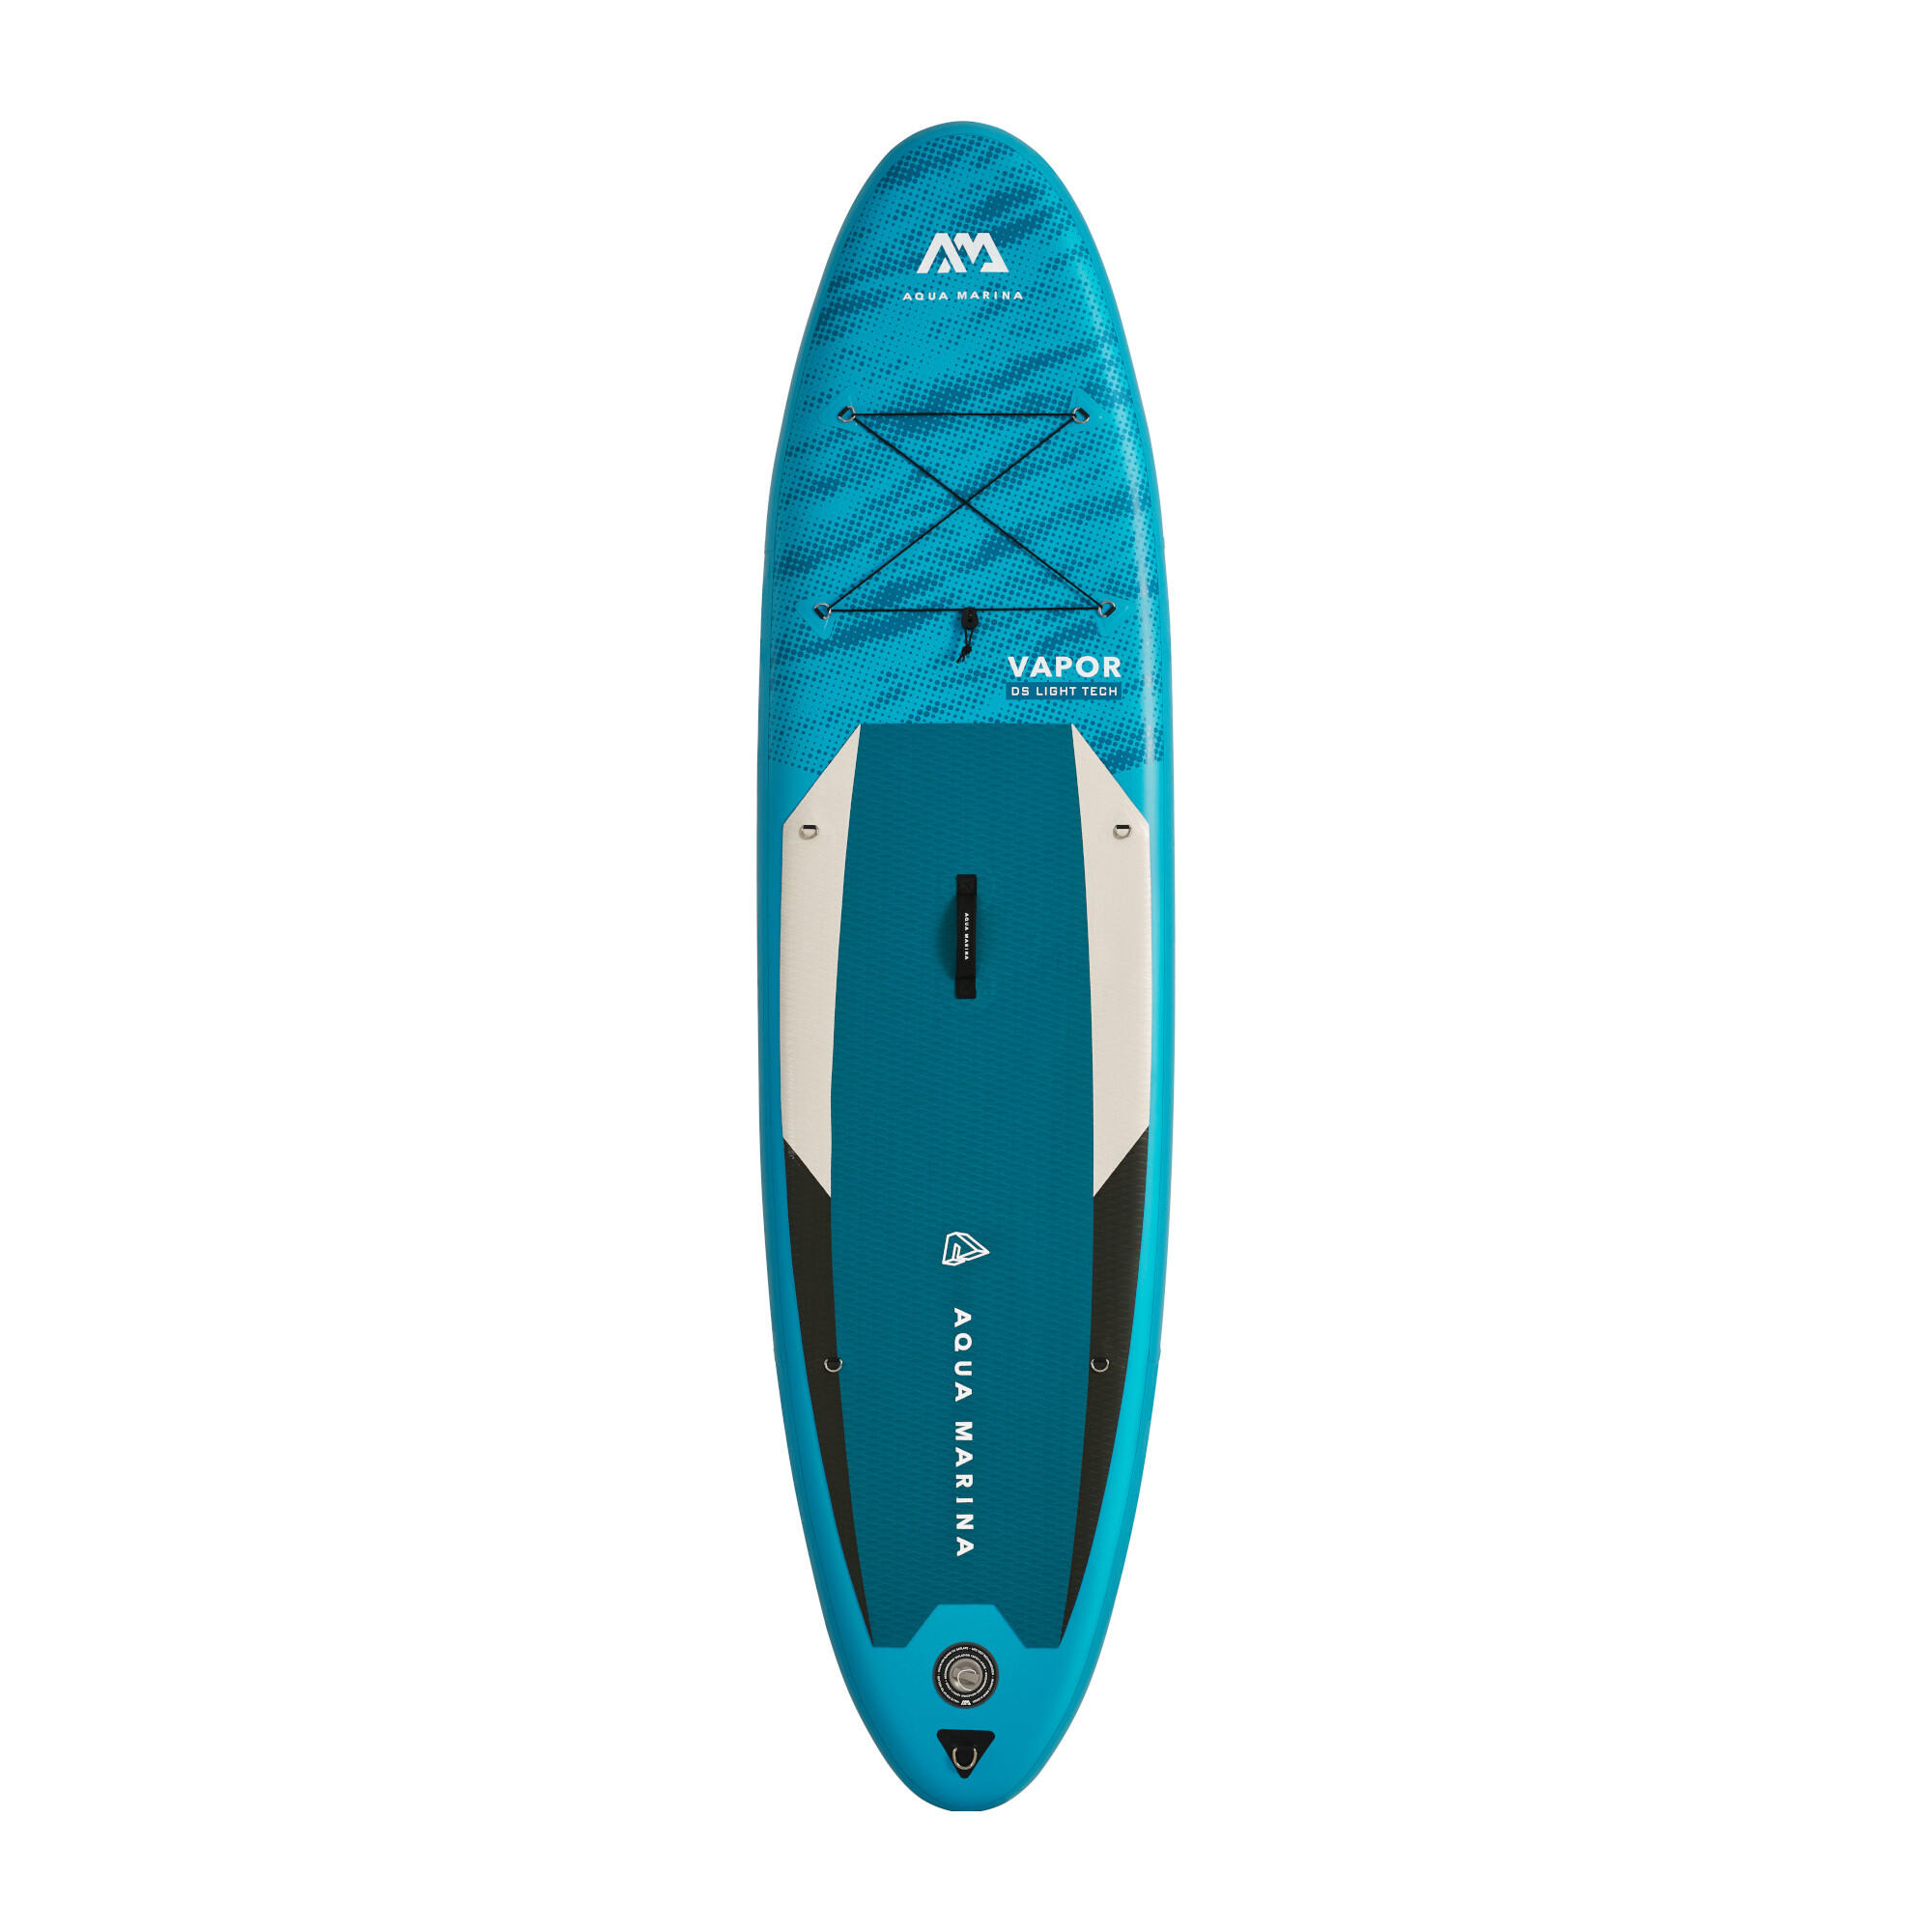 Aqua Marina Vapor stand-up paddle board package 10ft4/315cm 2/16